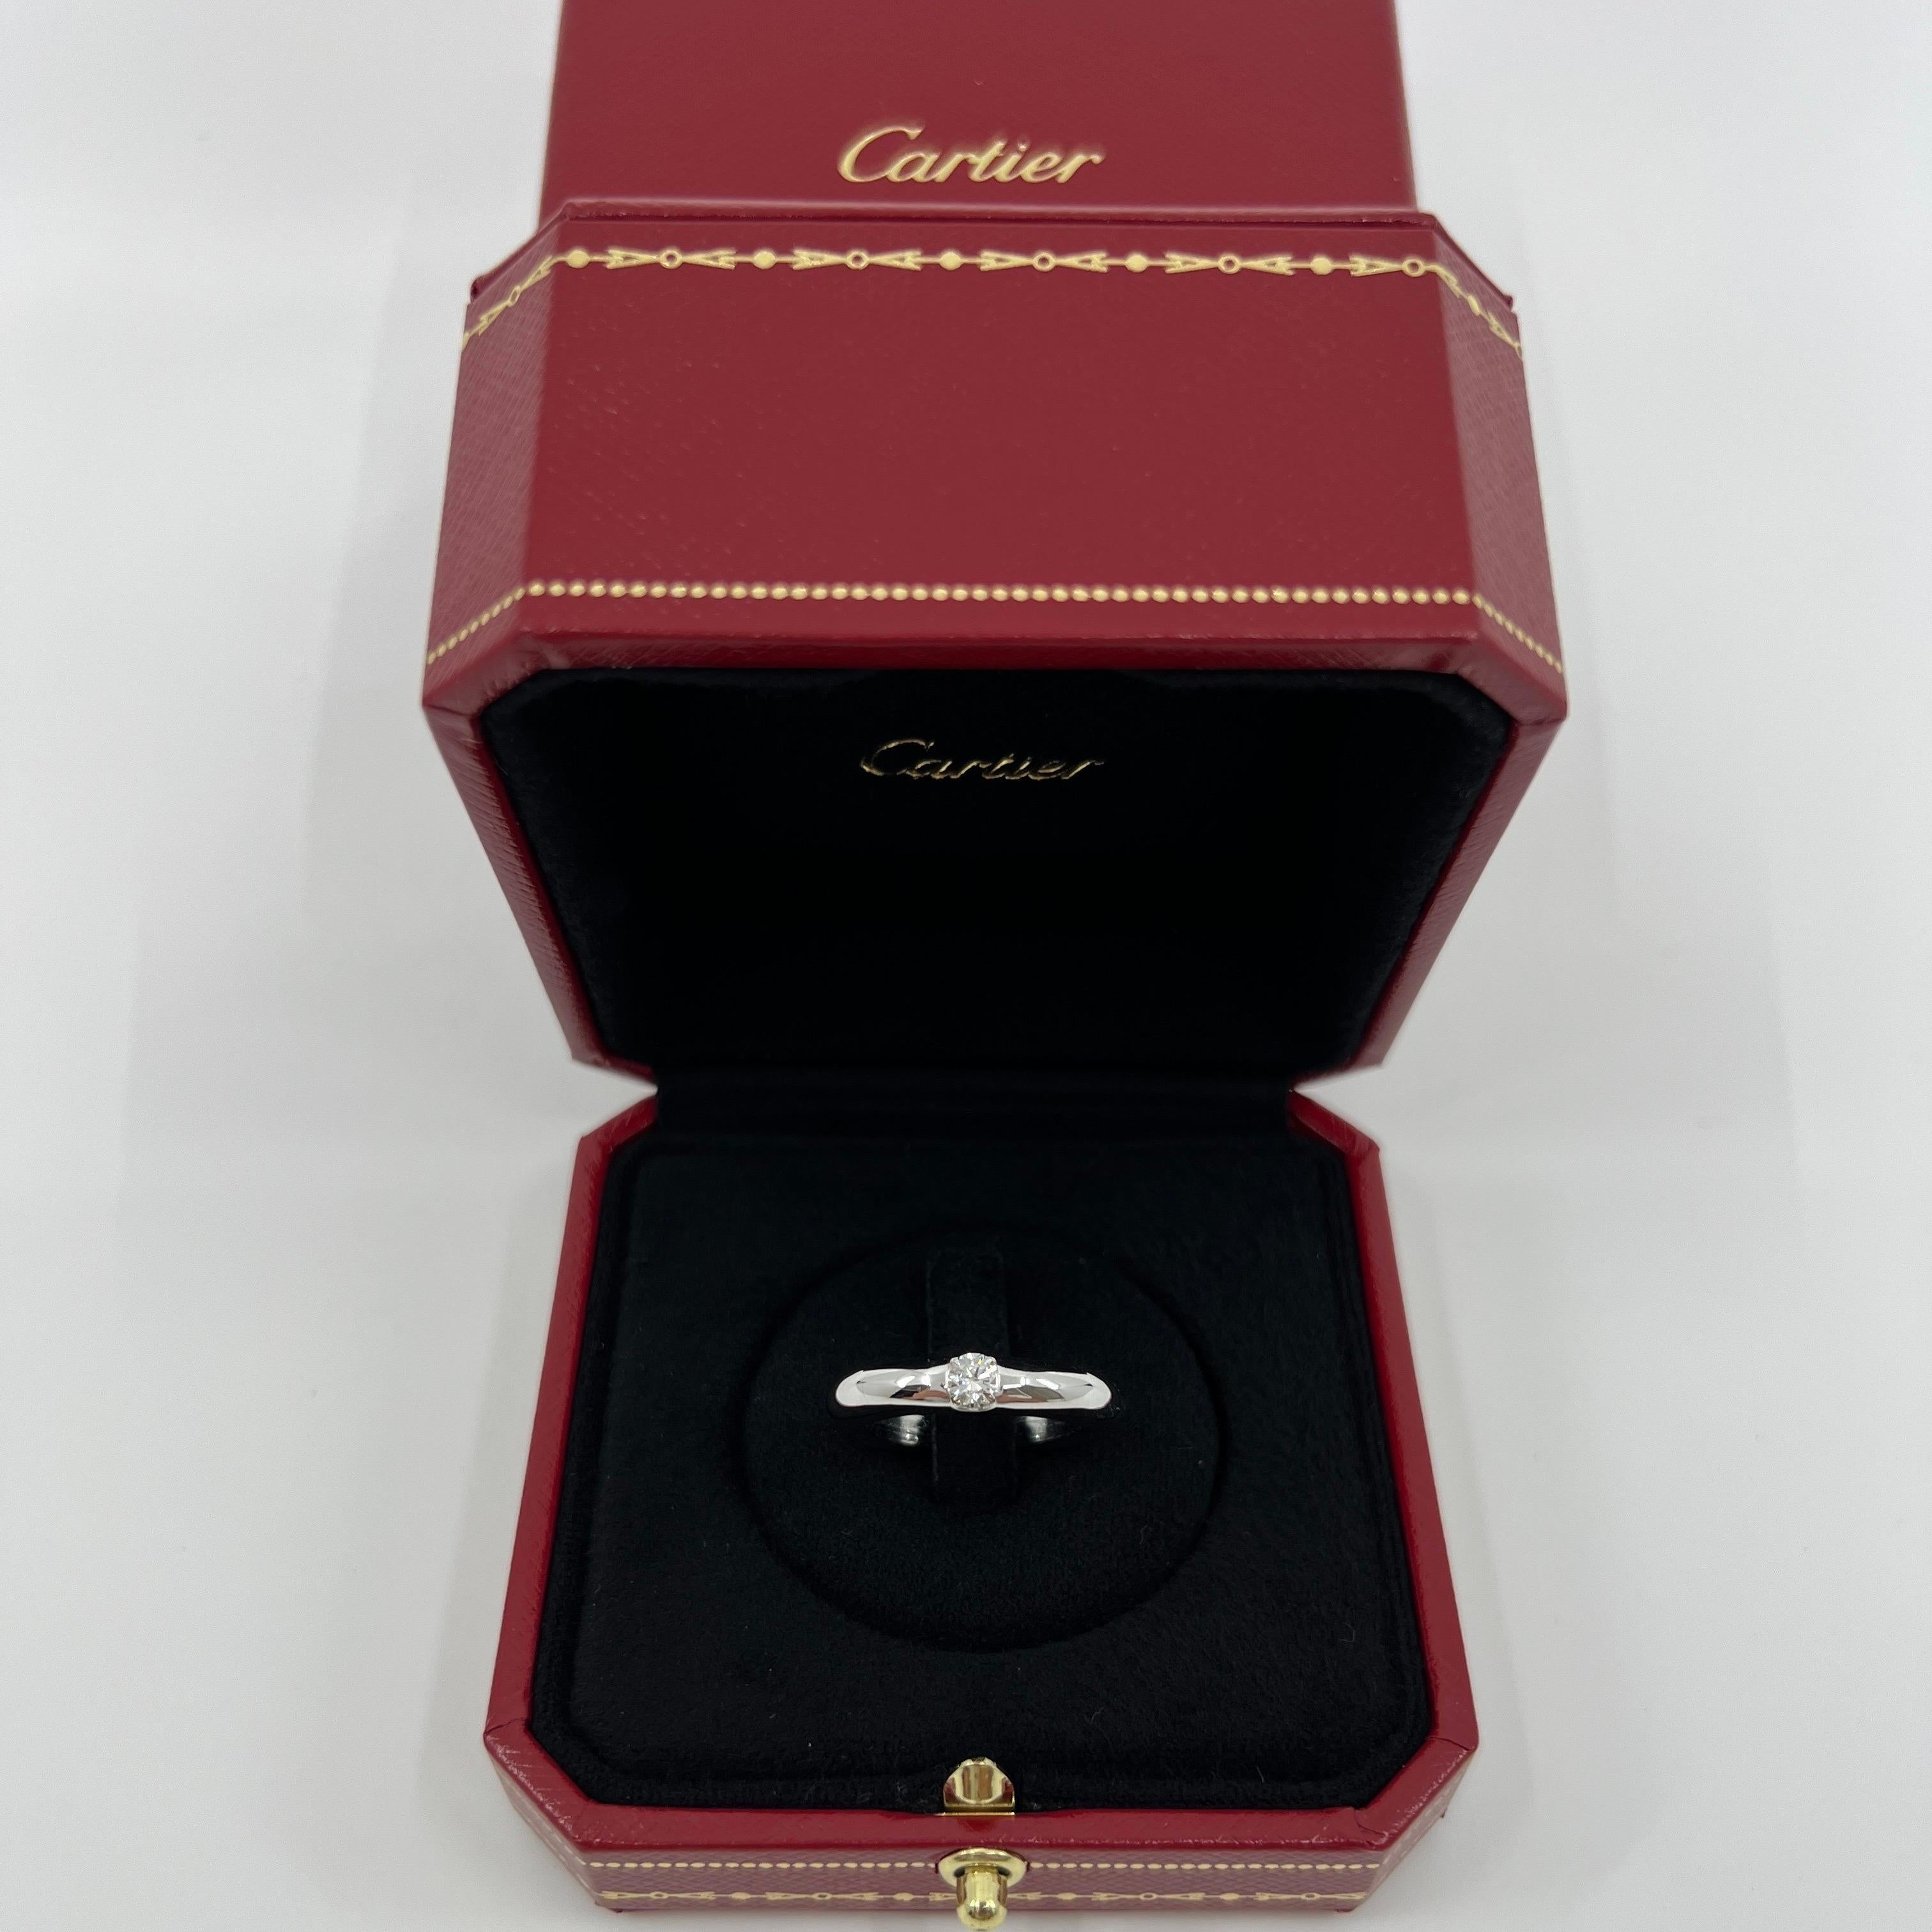 Vintage Cartier Round Brilliant Diamond 18k White Gold Solitaire Ring.

Stunning yellow gold ring set with a fine 0.25ct round diamond. E colour VVS1 clarity with an excellent round brilliant cut.
Fine jewellery houses like Cartier only use the